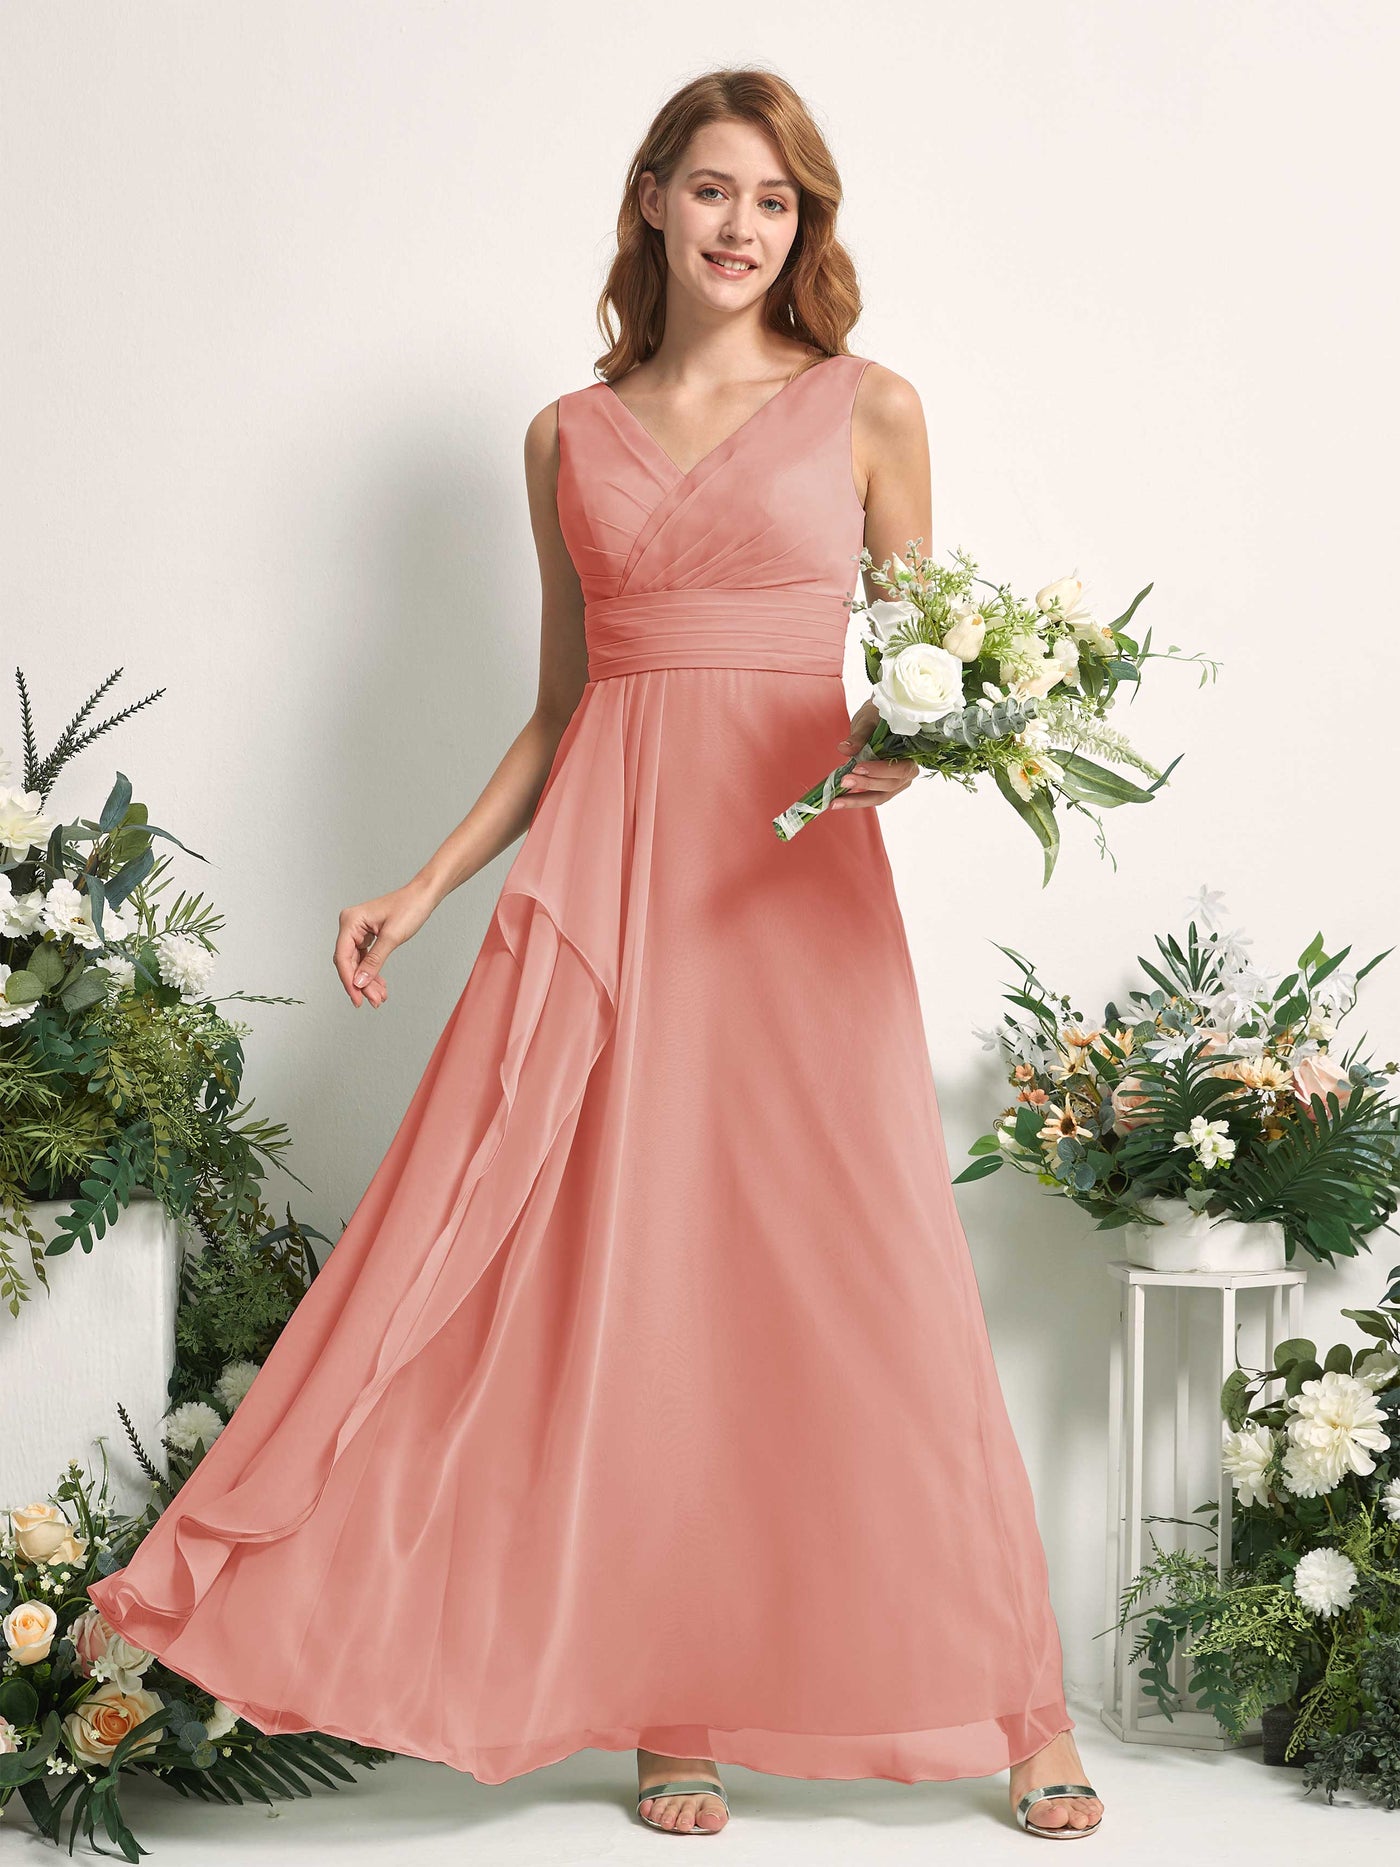 Bridesmaid Dress A-line Chiffon V-neck Full Length Sleeveless Wedding Party Dress - Champagne Rose (81227106)#color_champagne-rose